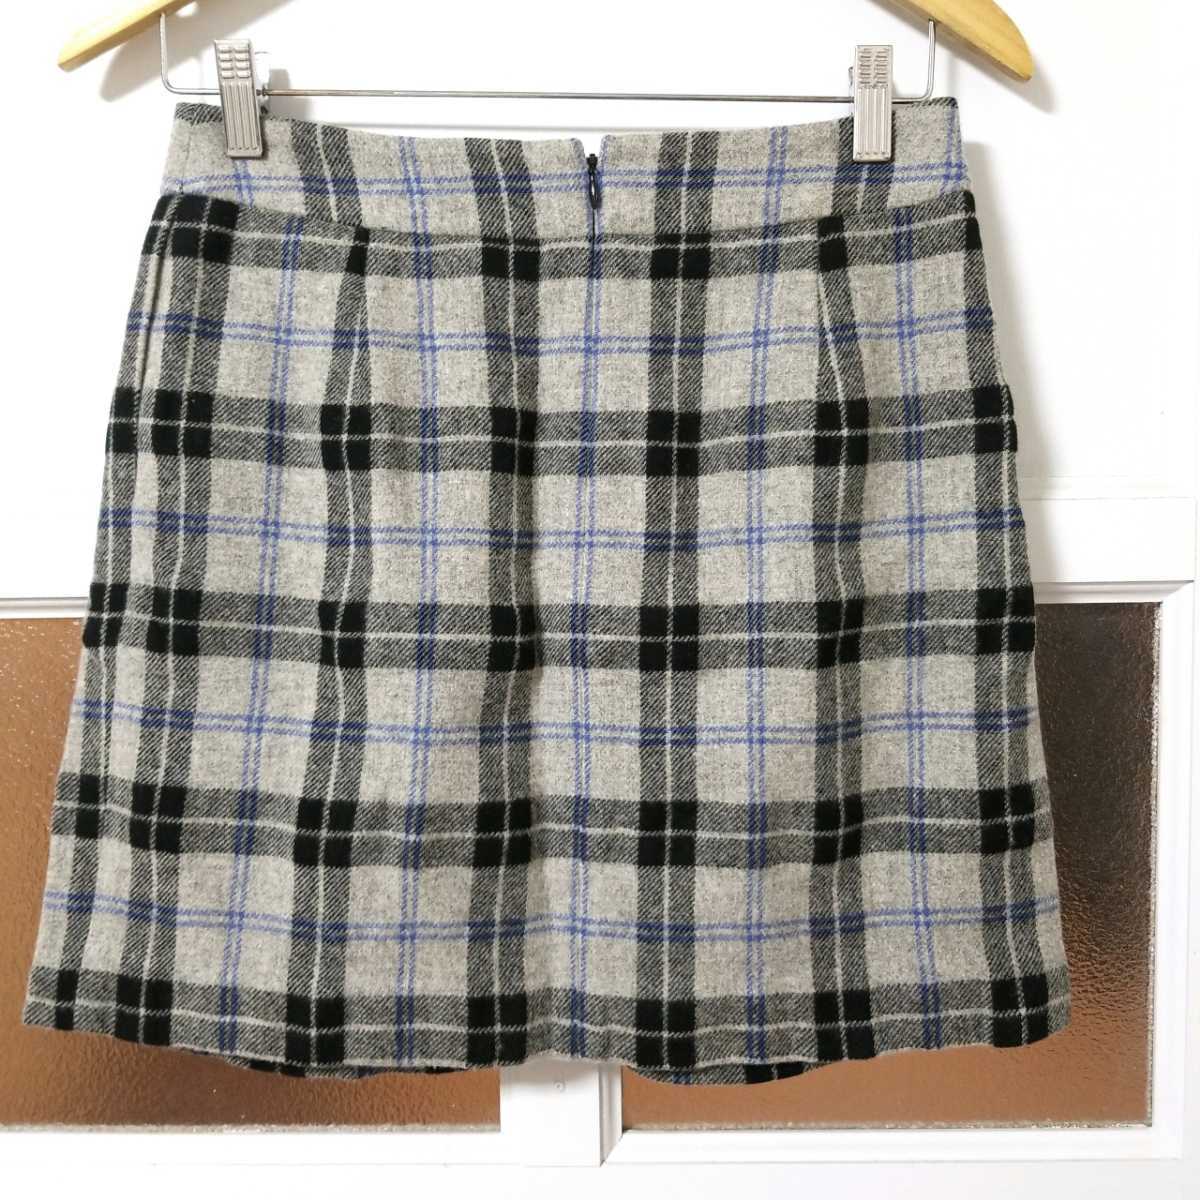  theory spring autumn winter wool black × blue × gray check pattern ko Kuhn tight skirt 0(XS size /5 number ) suit small size 